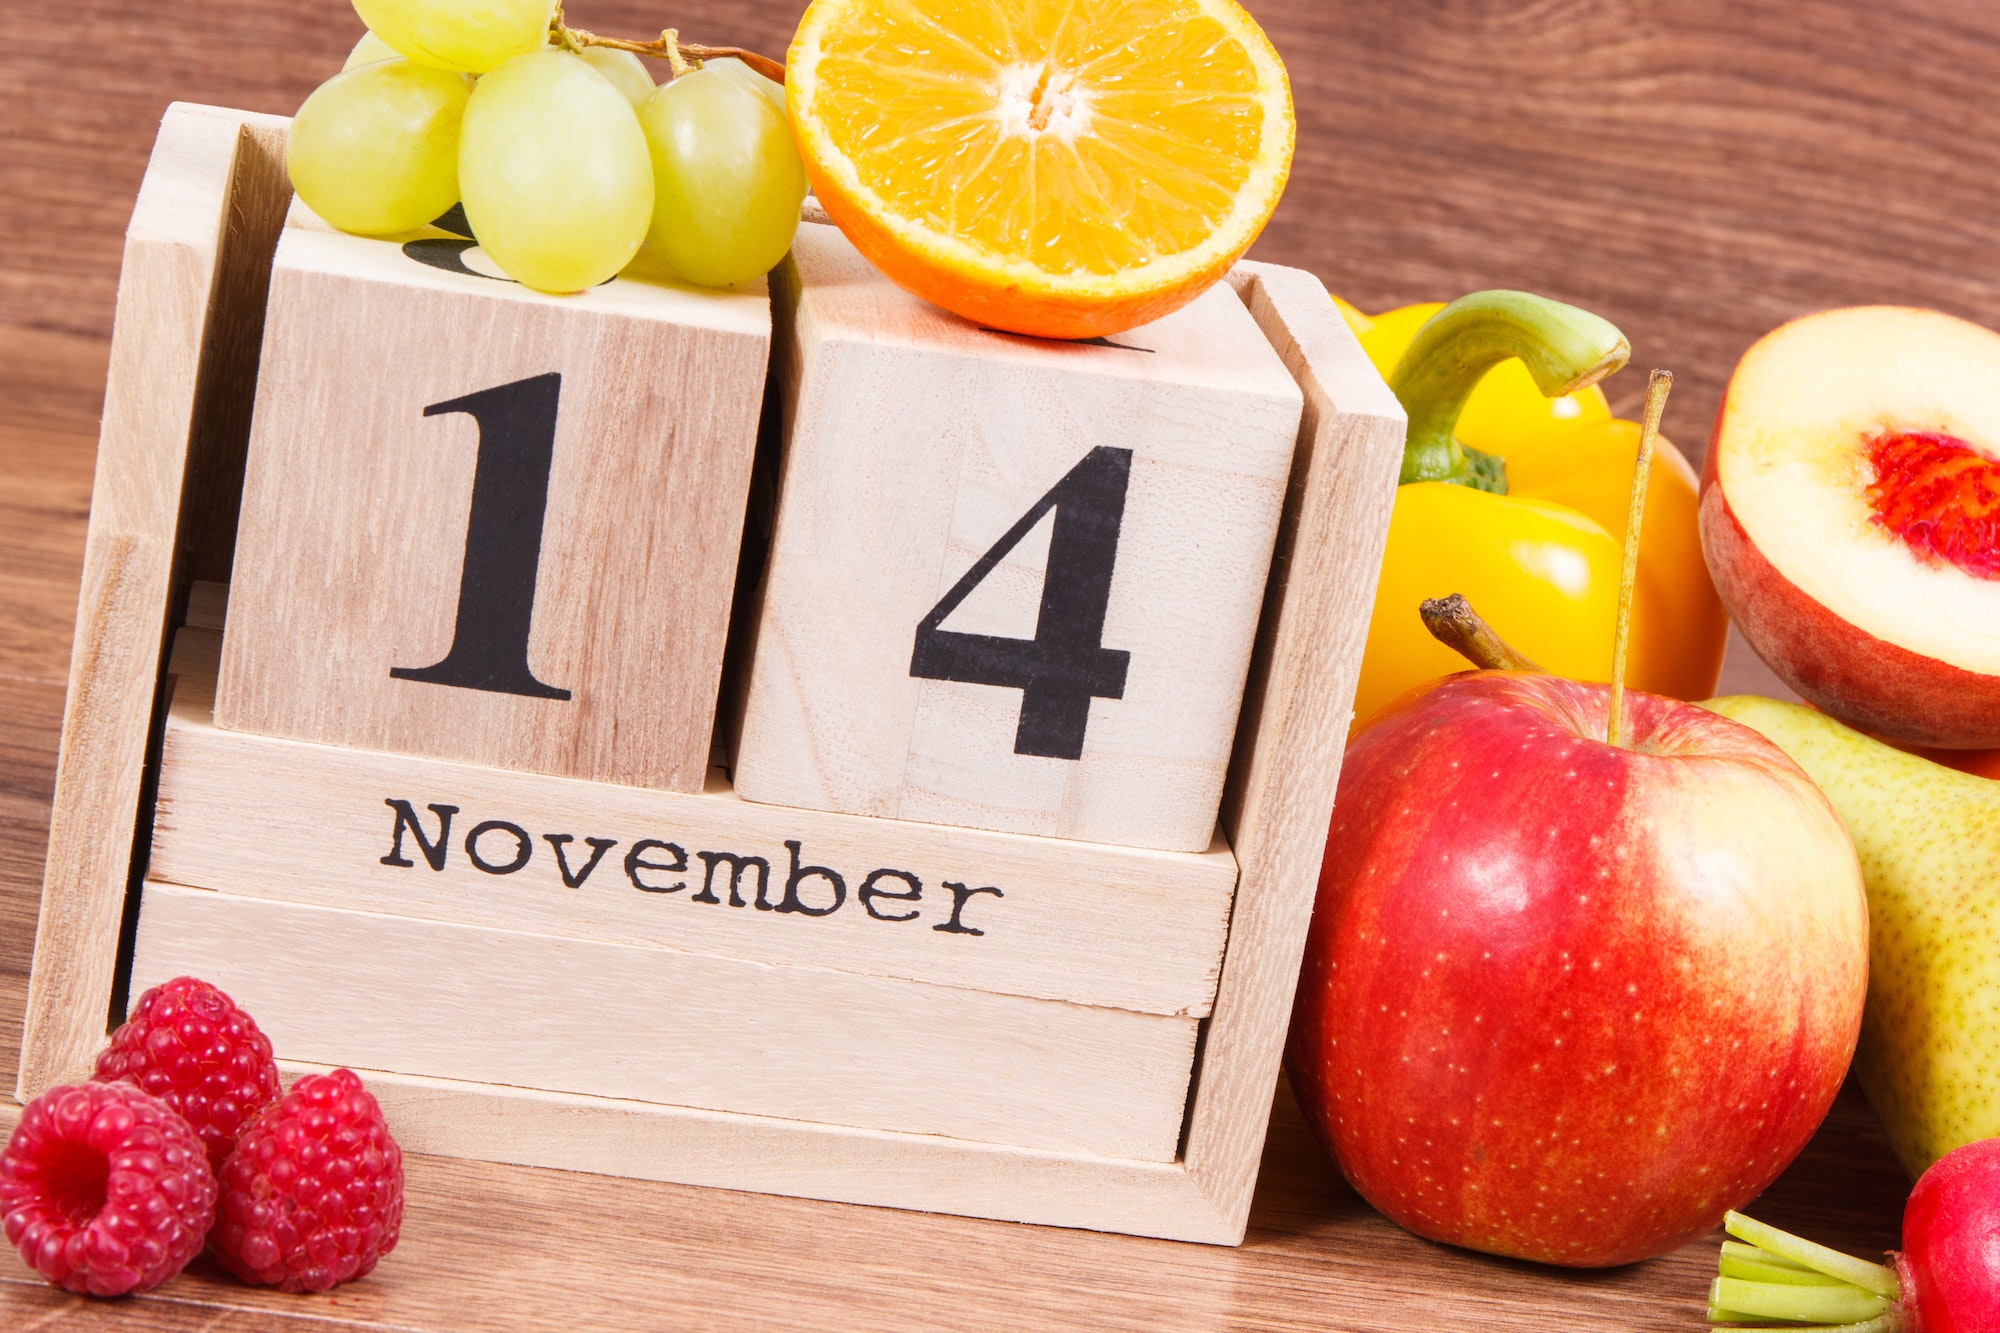 Date of 14 November on calendar and fruits with vegetables, world diabetes day concept